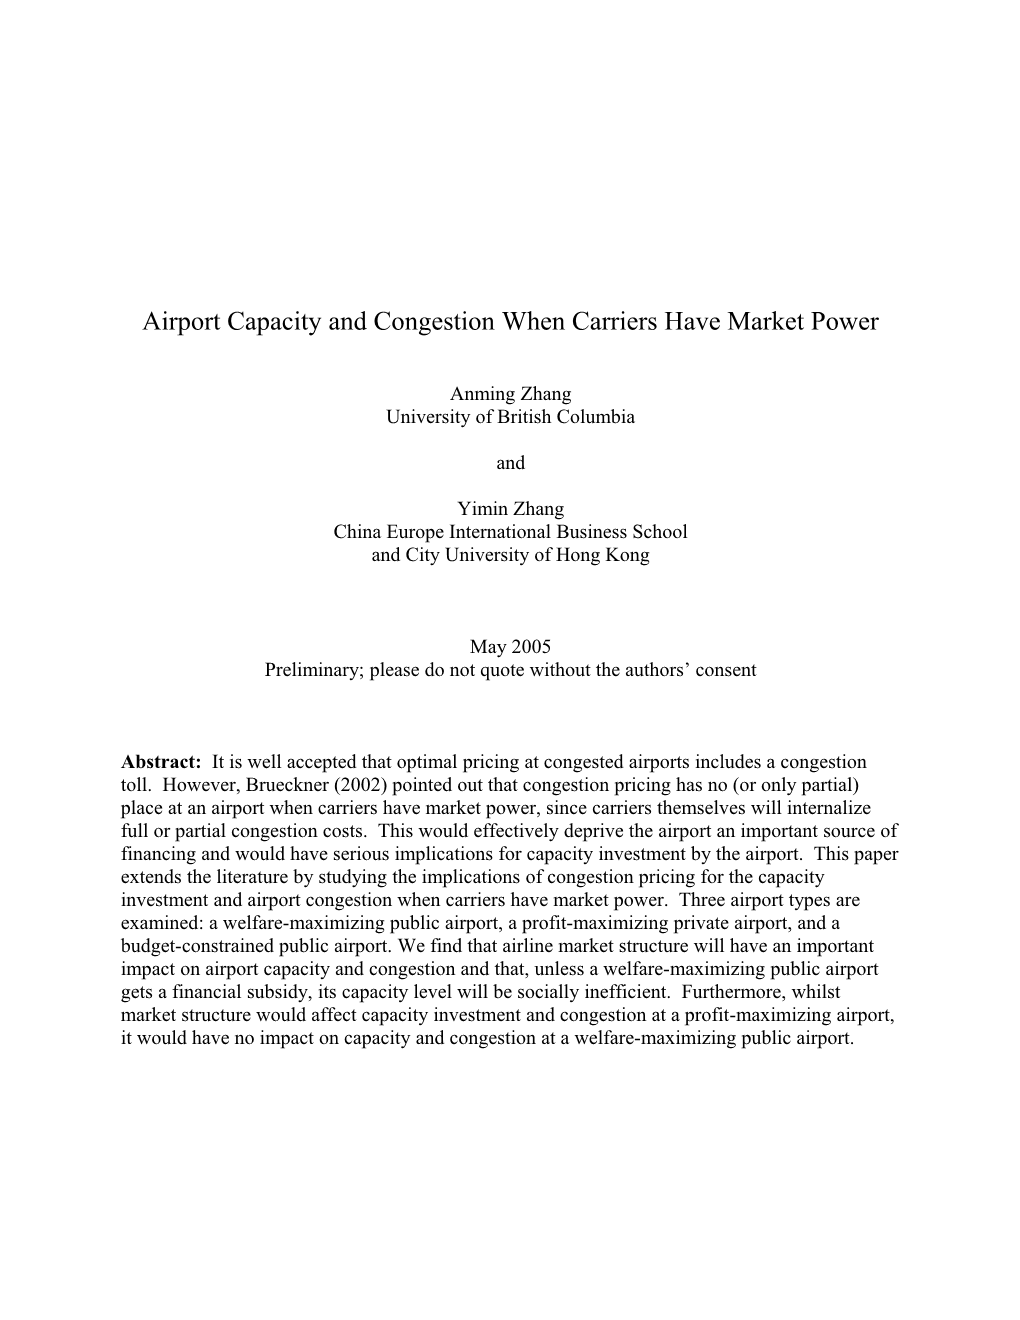 Paper on Airport Capacity